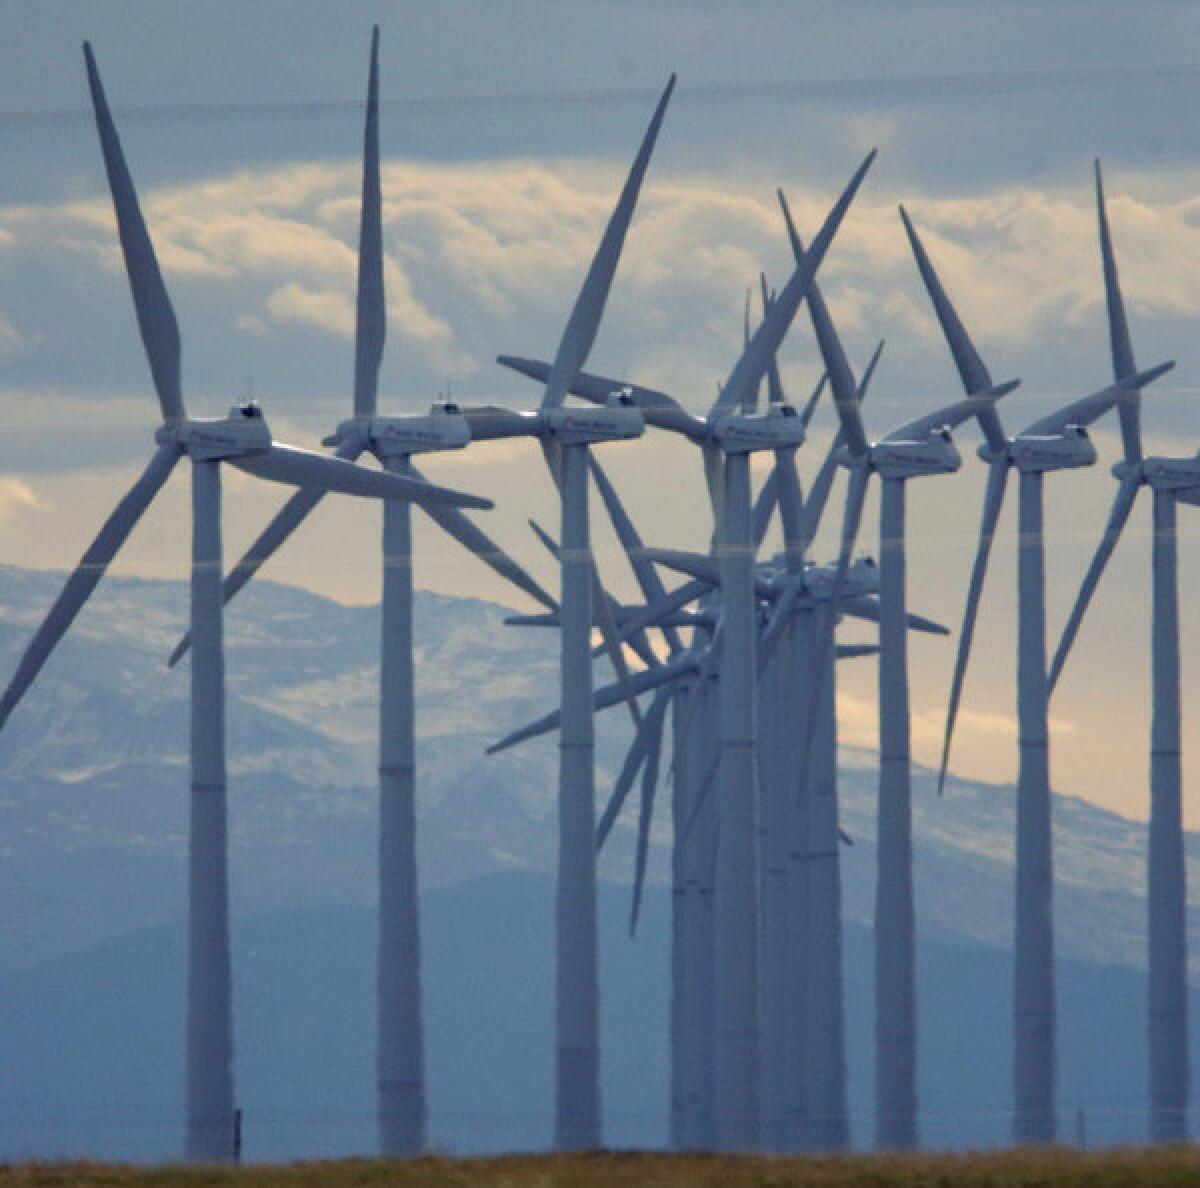 A man who solicited investors nationwide for a wind farm in Wyoming was sentenced to 12 years in prison for defrauding 83 investors, many of them elderly, of more than $4.4 million by promoting investment in nonexistent wind farms.